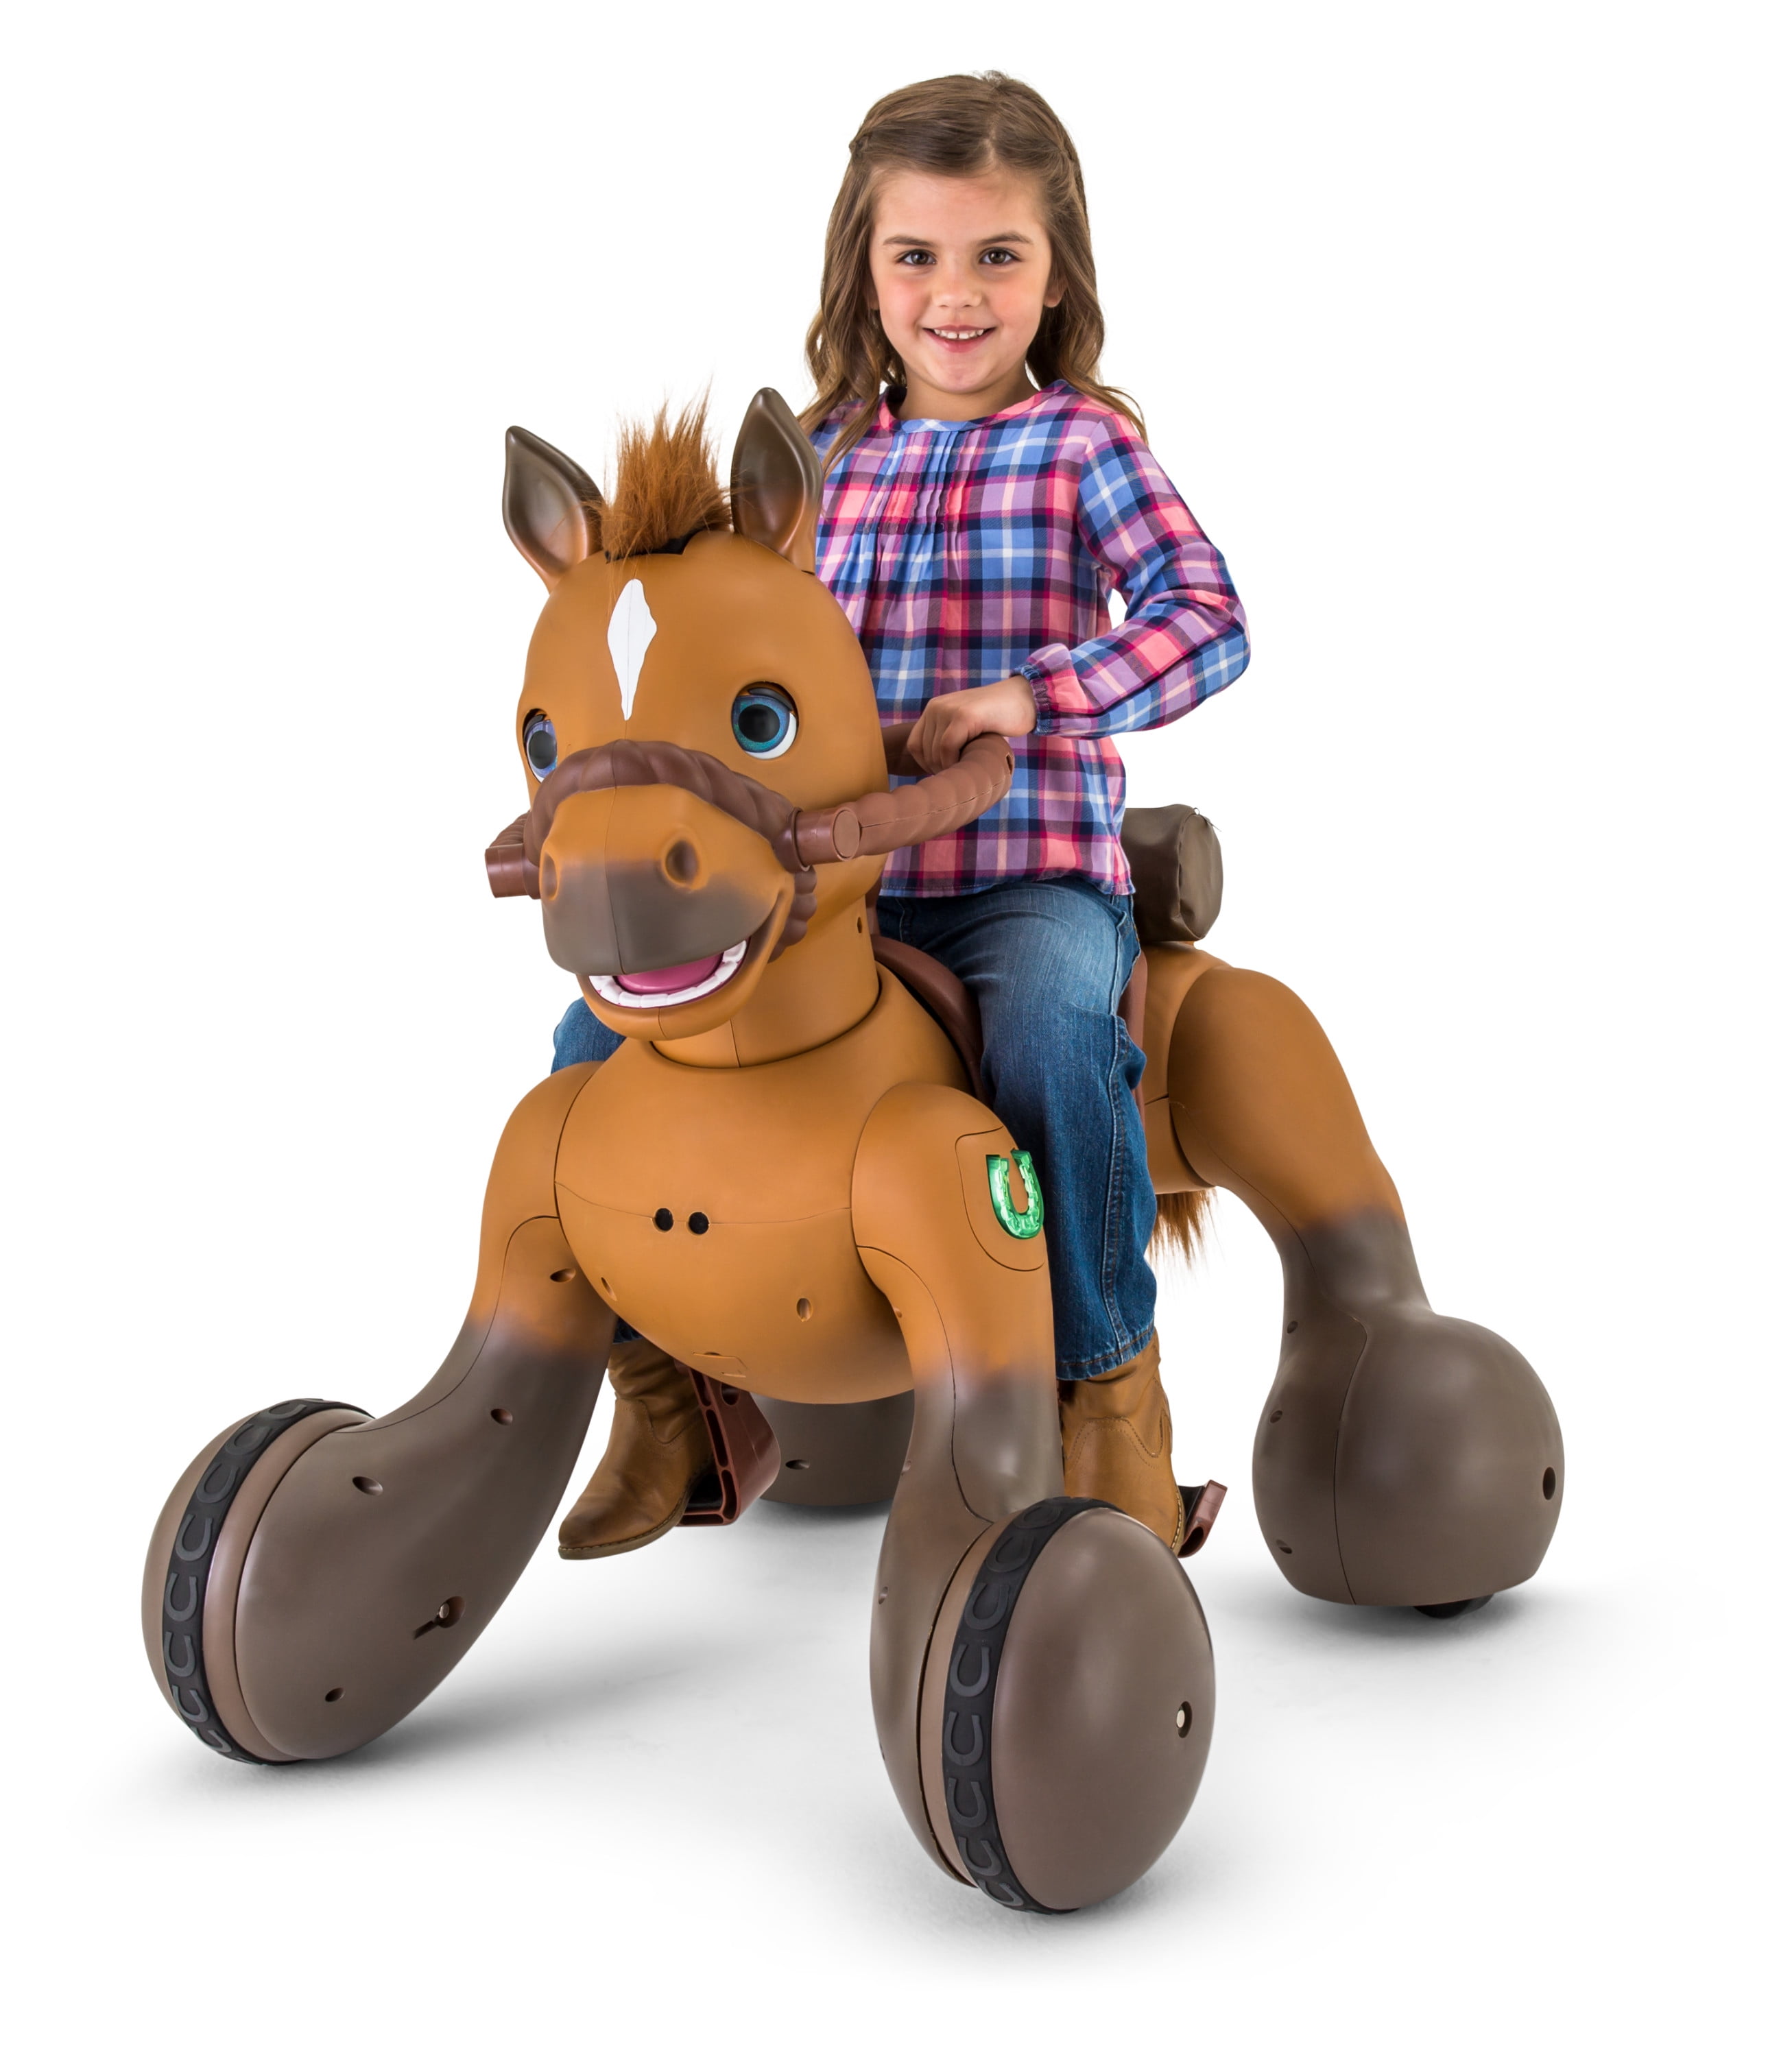 Kids Ride-On Rolling Horse Interactive Battery Operated Toy Plush Brown 